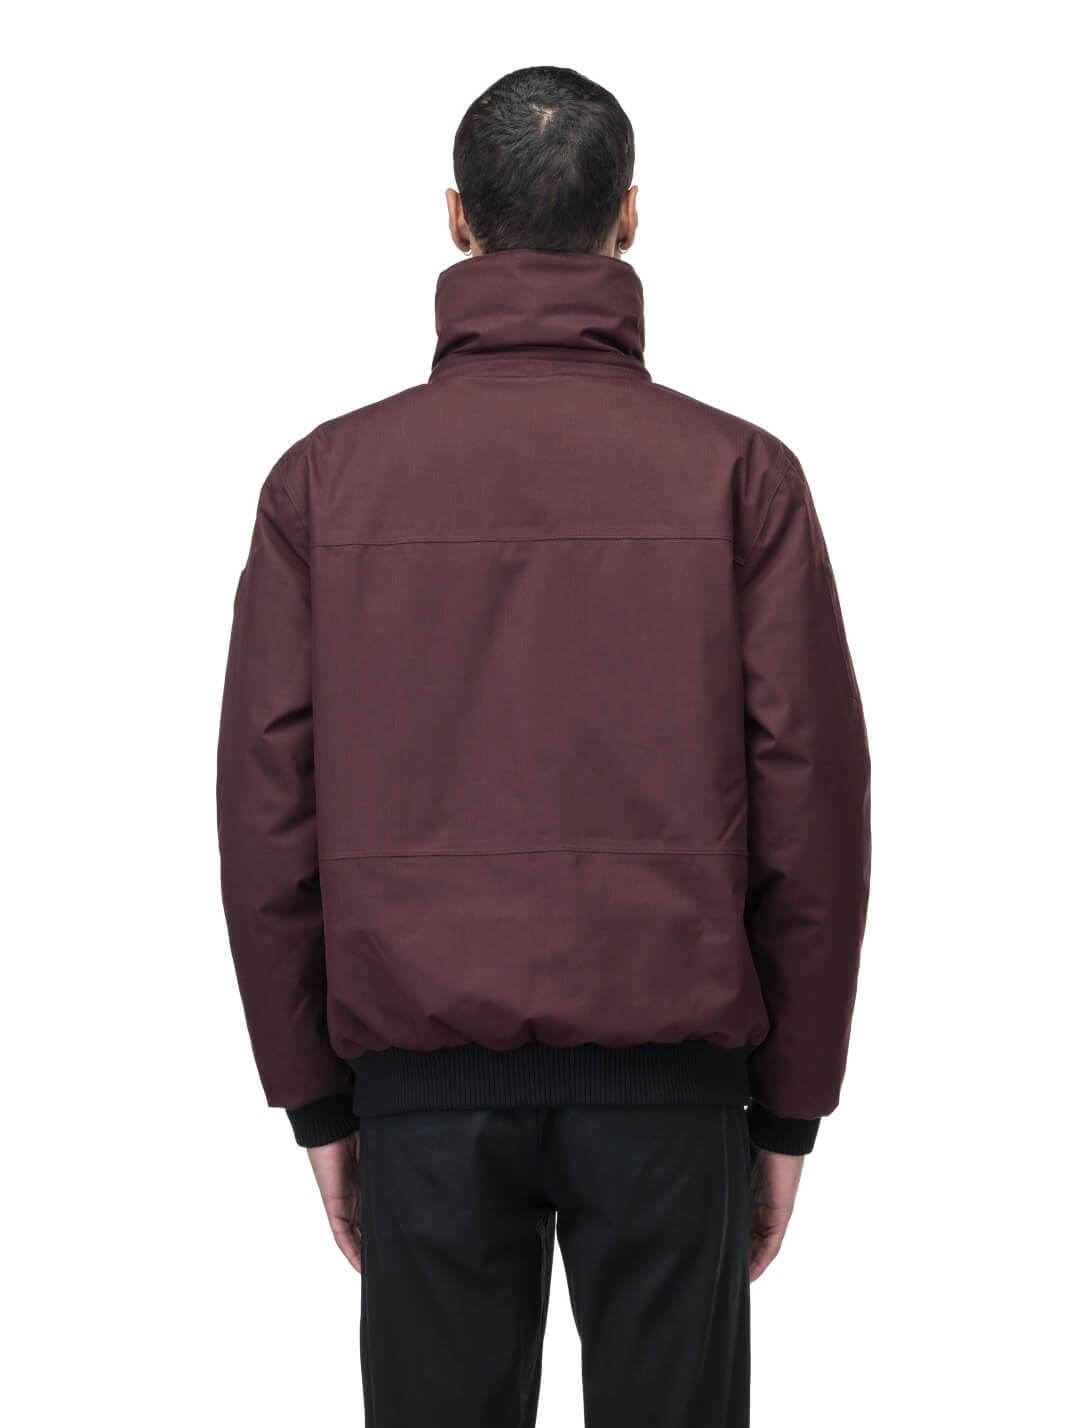 Men's sleek down filled bomber jacket with clean details and a fur free hood in Merlot